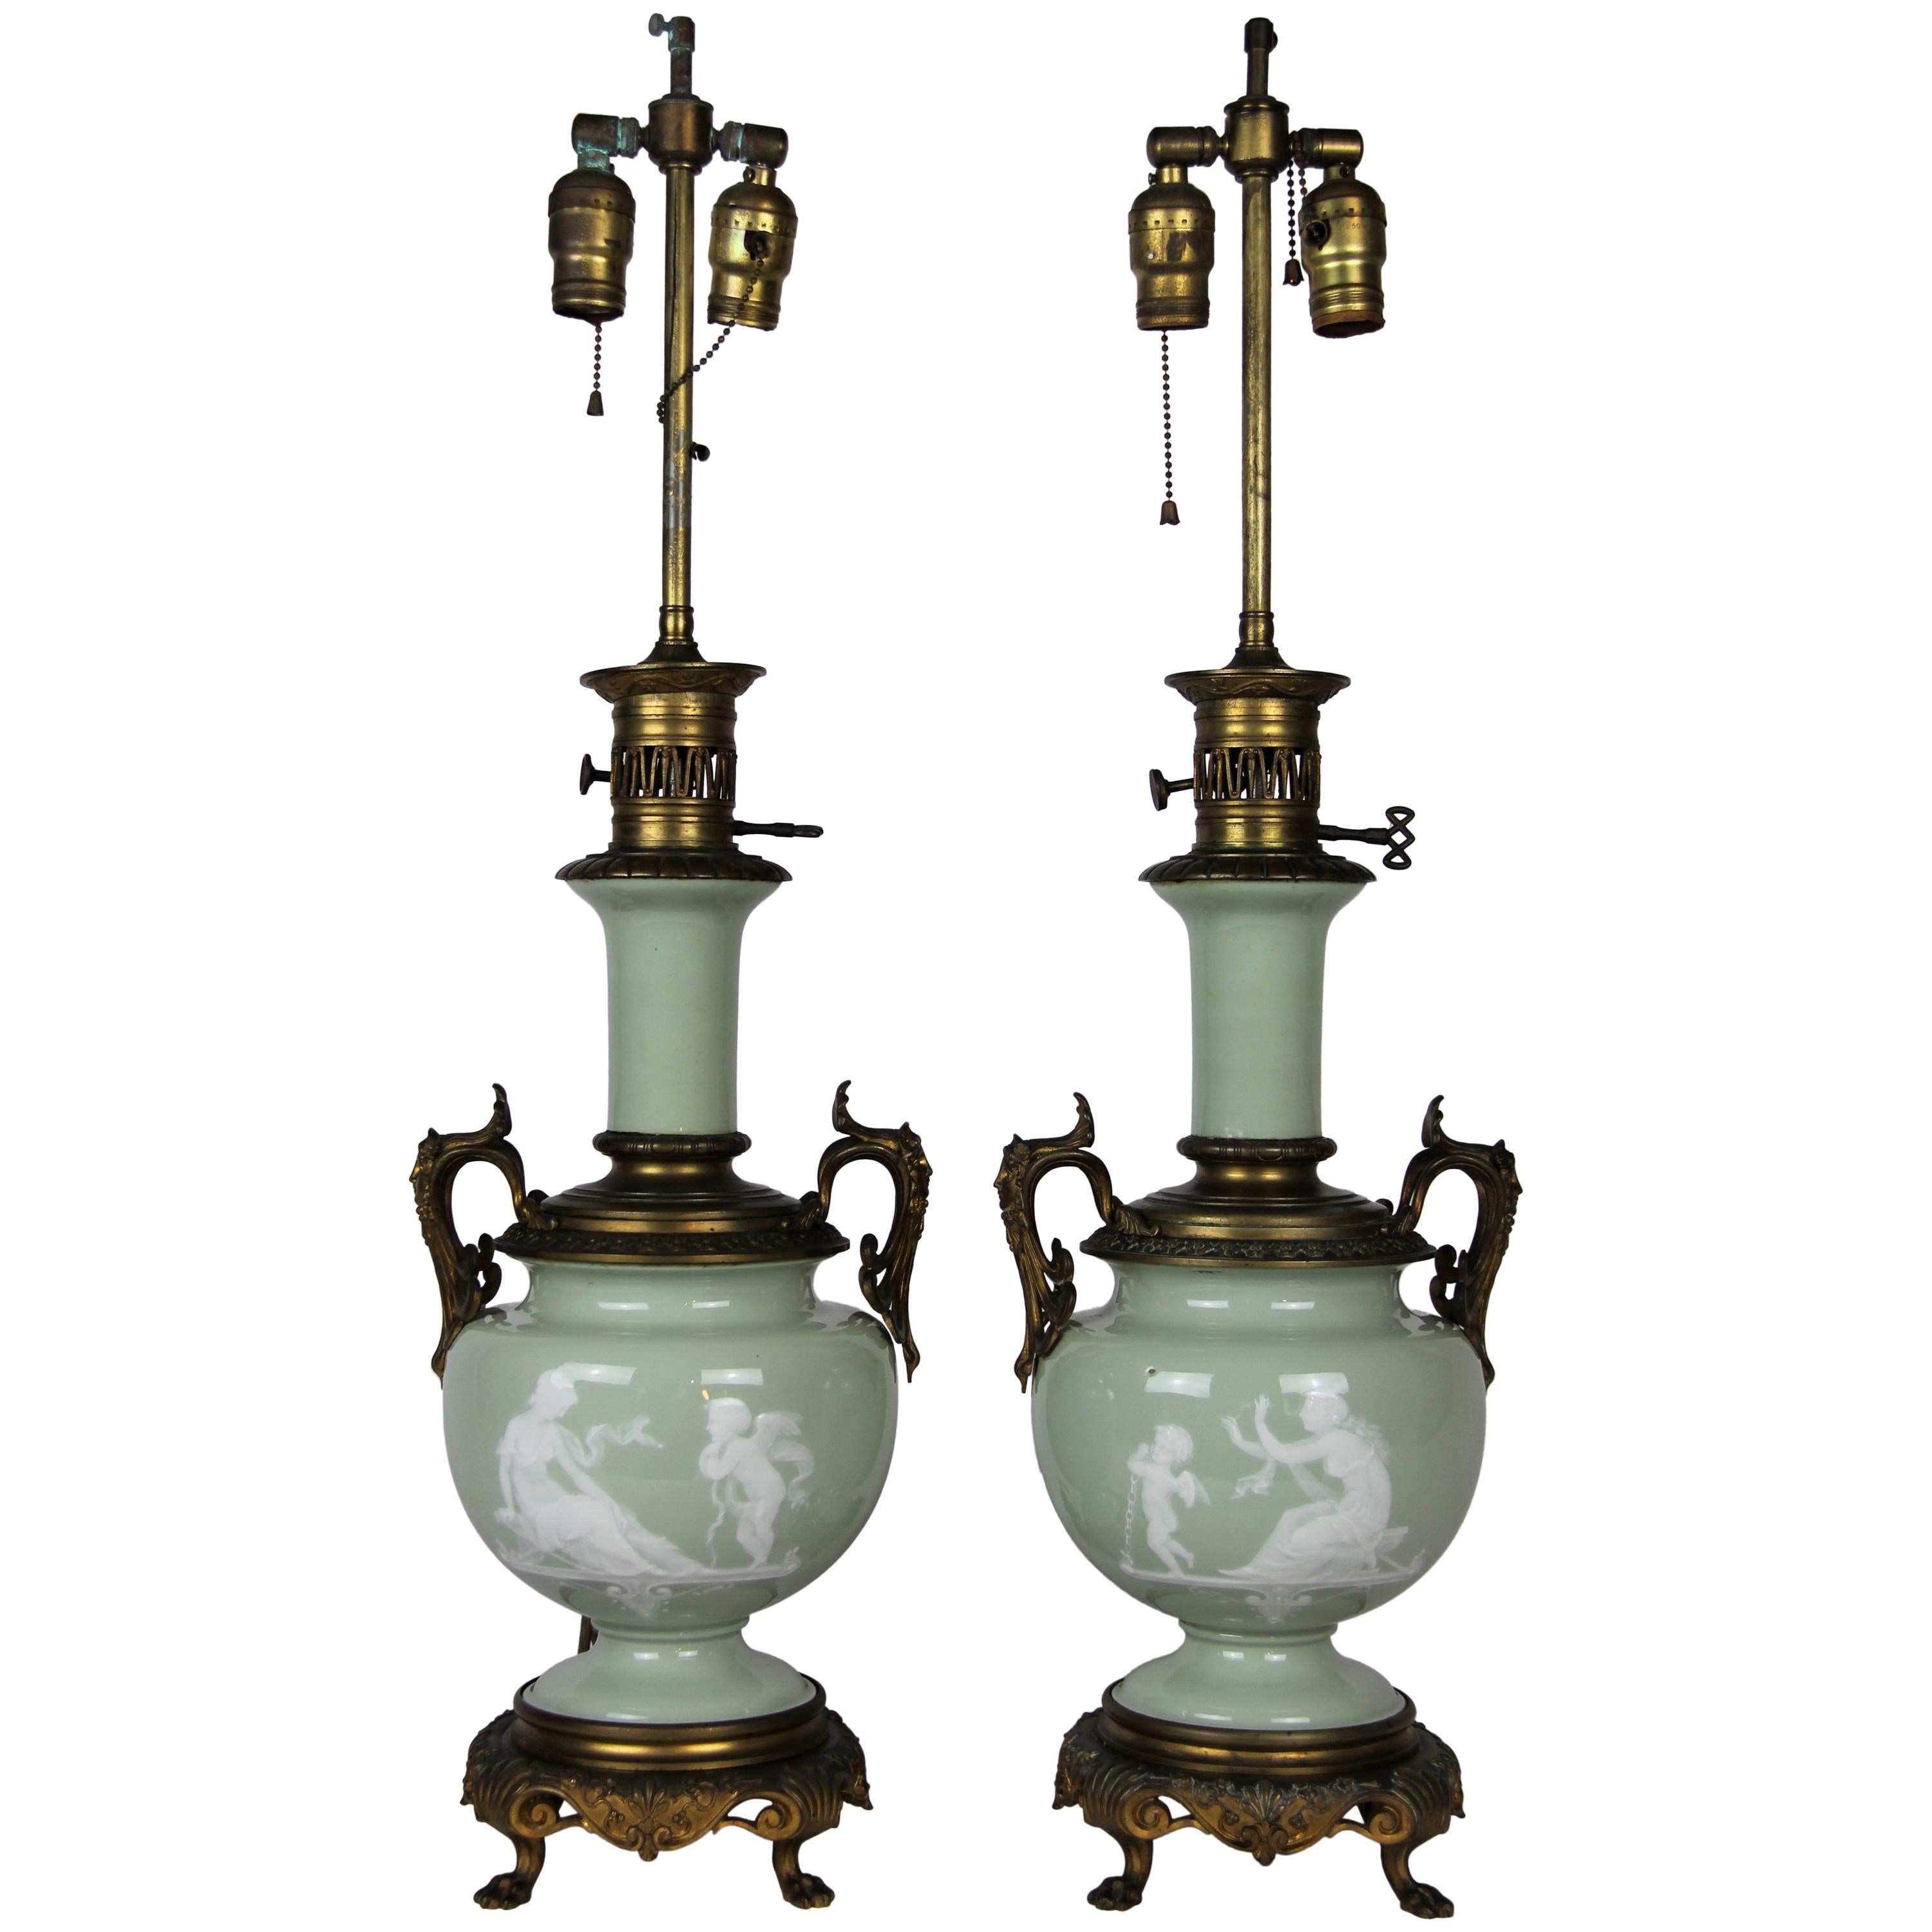 French Gilt Bronze Mounted Double-Sided Pate Sur Pate Celadon Ground Lamps, Pair